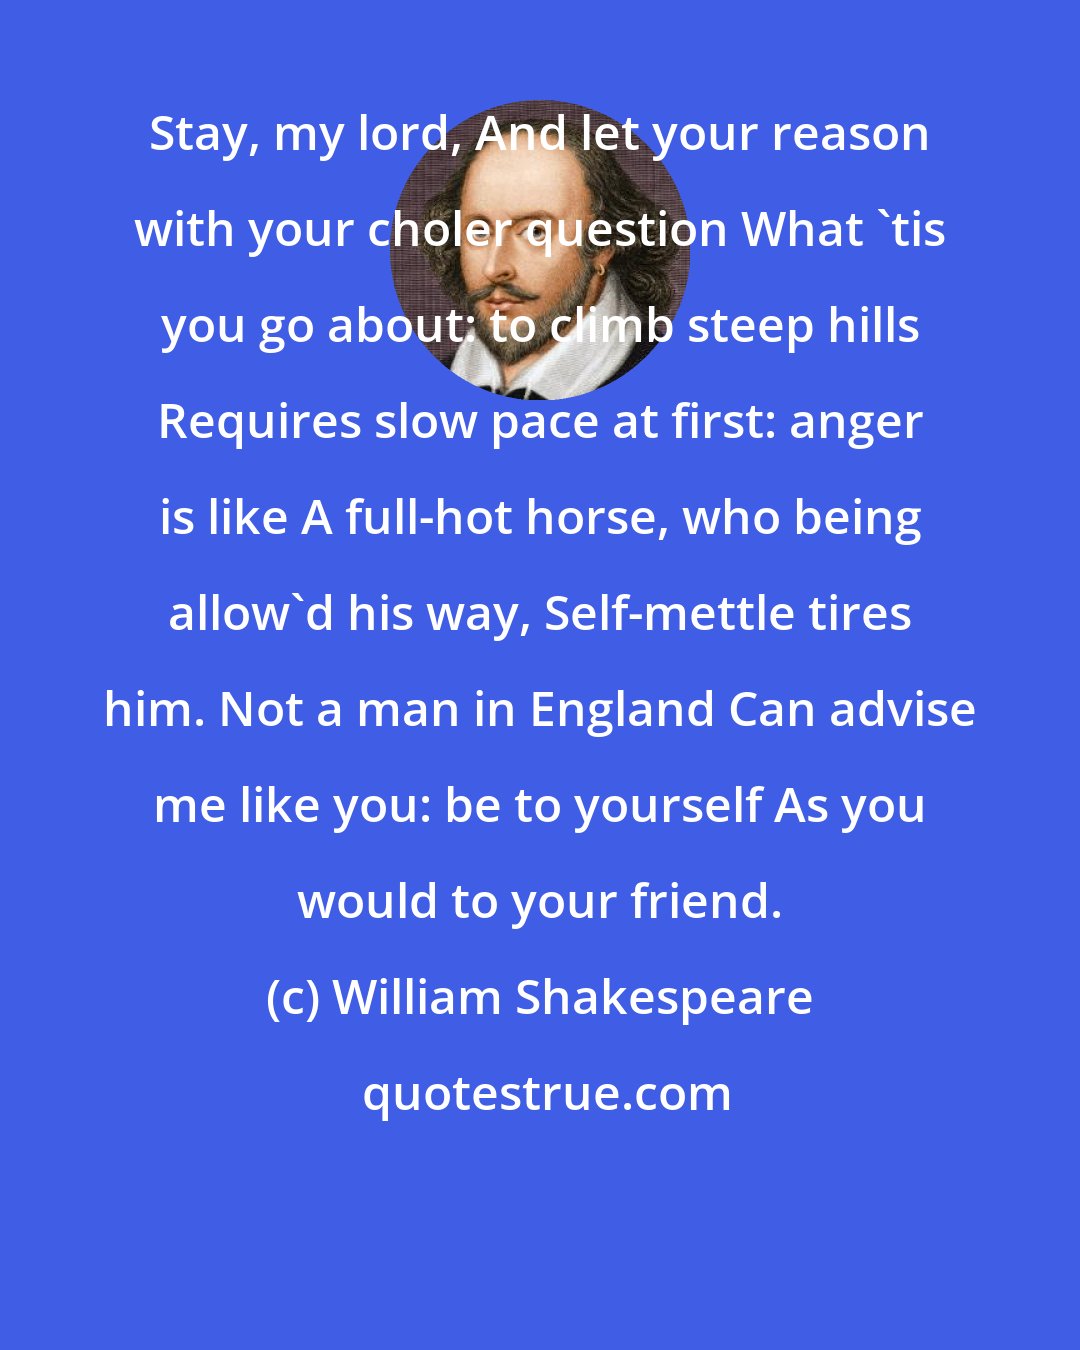 William Shakespeare: Stay, my lord, And let your reason with your choler question What 'tis you go about: to climb steep hills Requires slow pace at first: anger is like A full-hot horse, who being allow'd his way, Self-mettle tires him. Not a man in England Can advise me like you: be to yourself As you would to your friend.